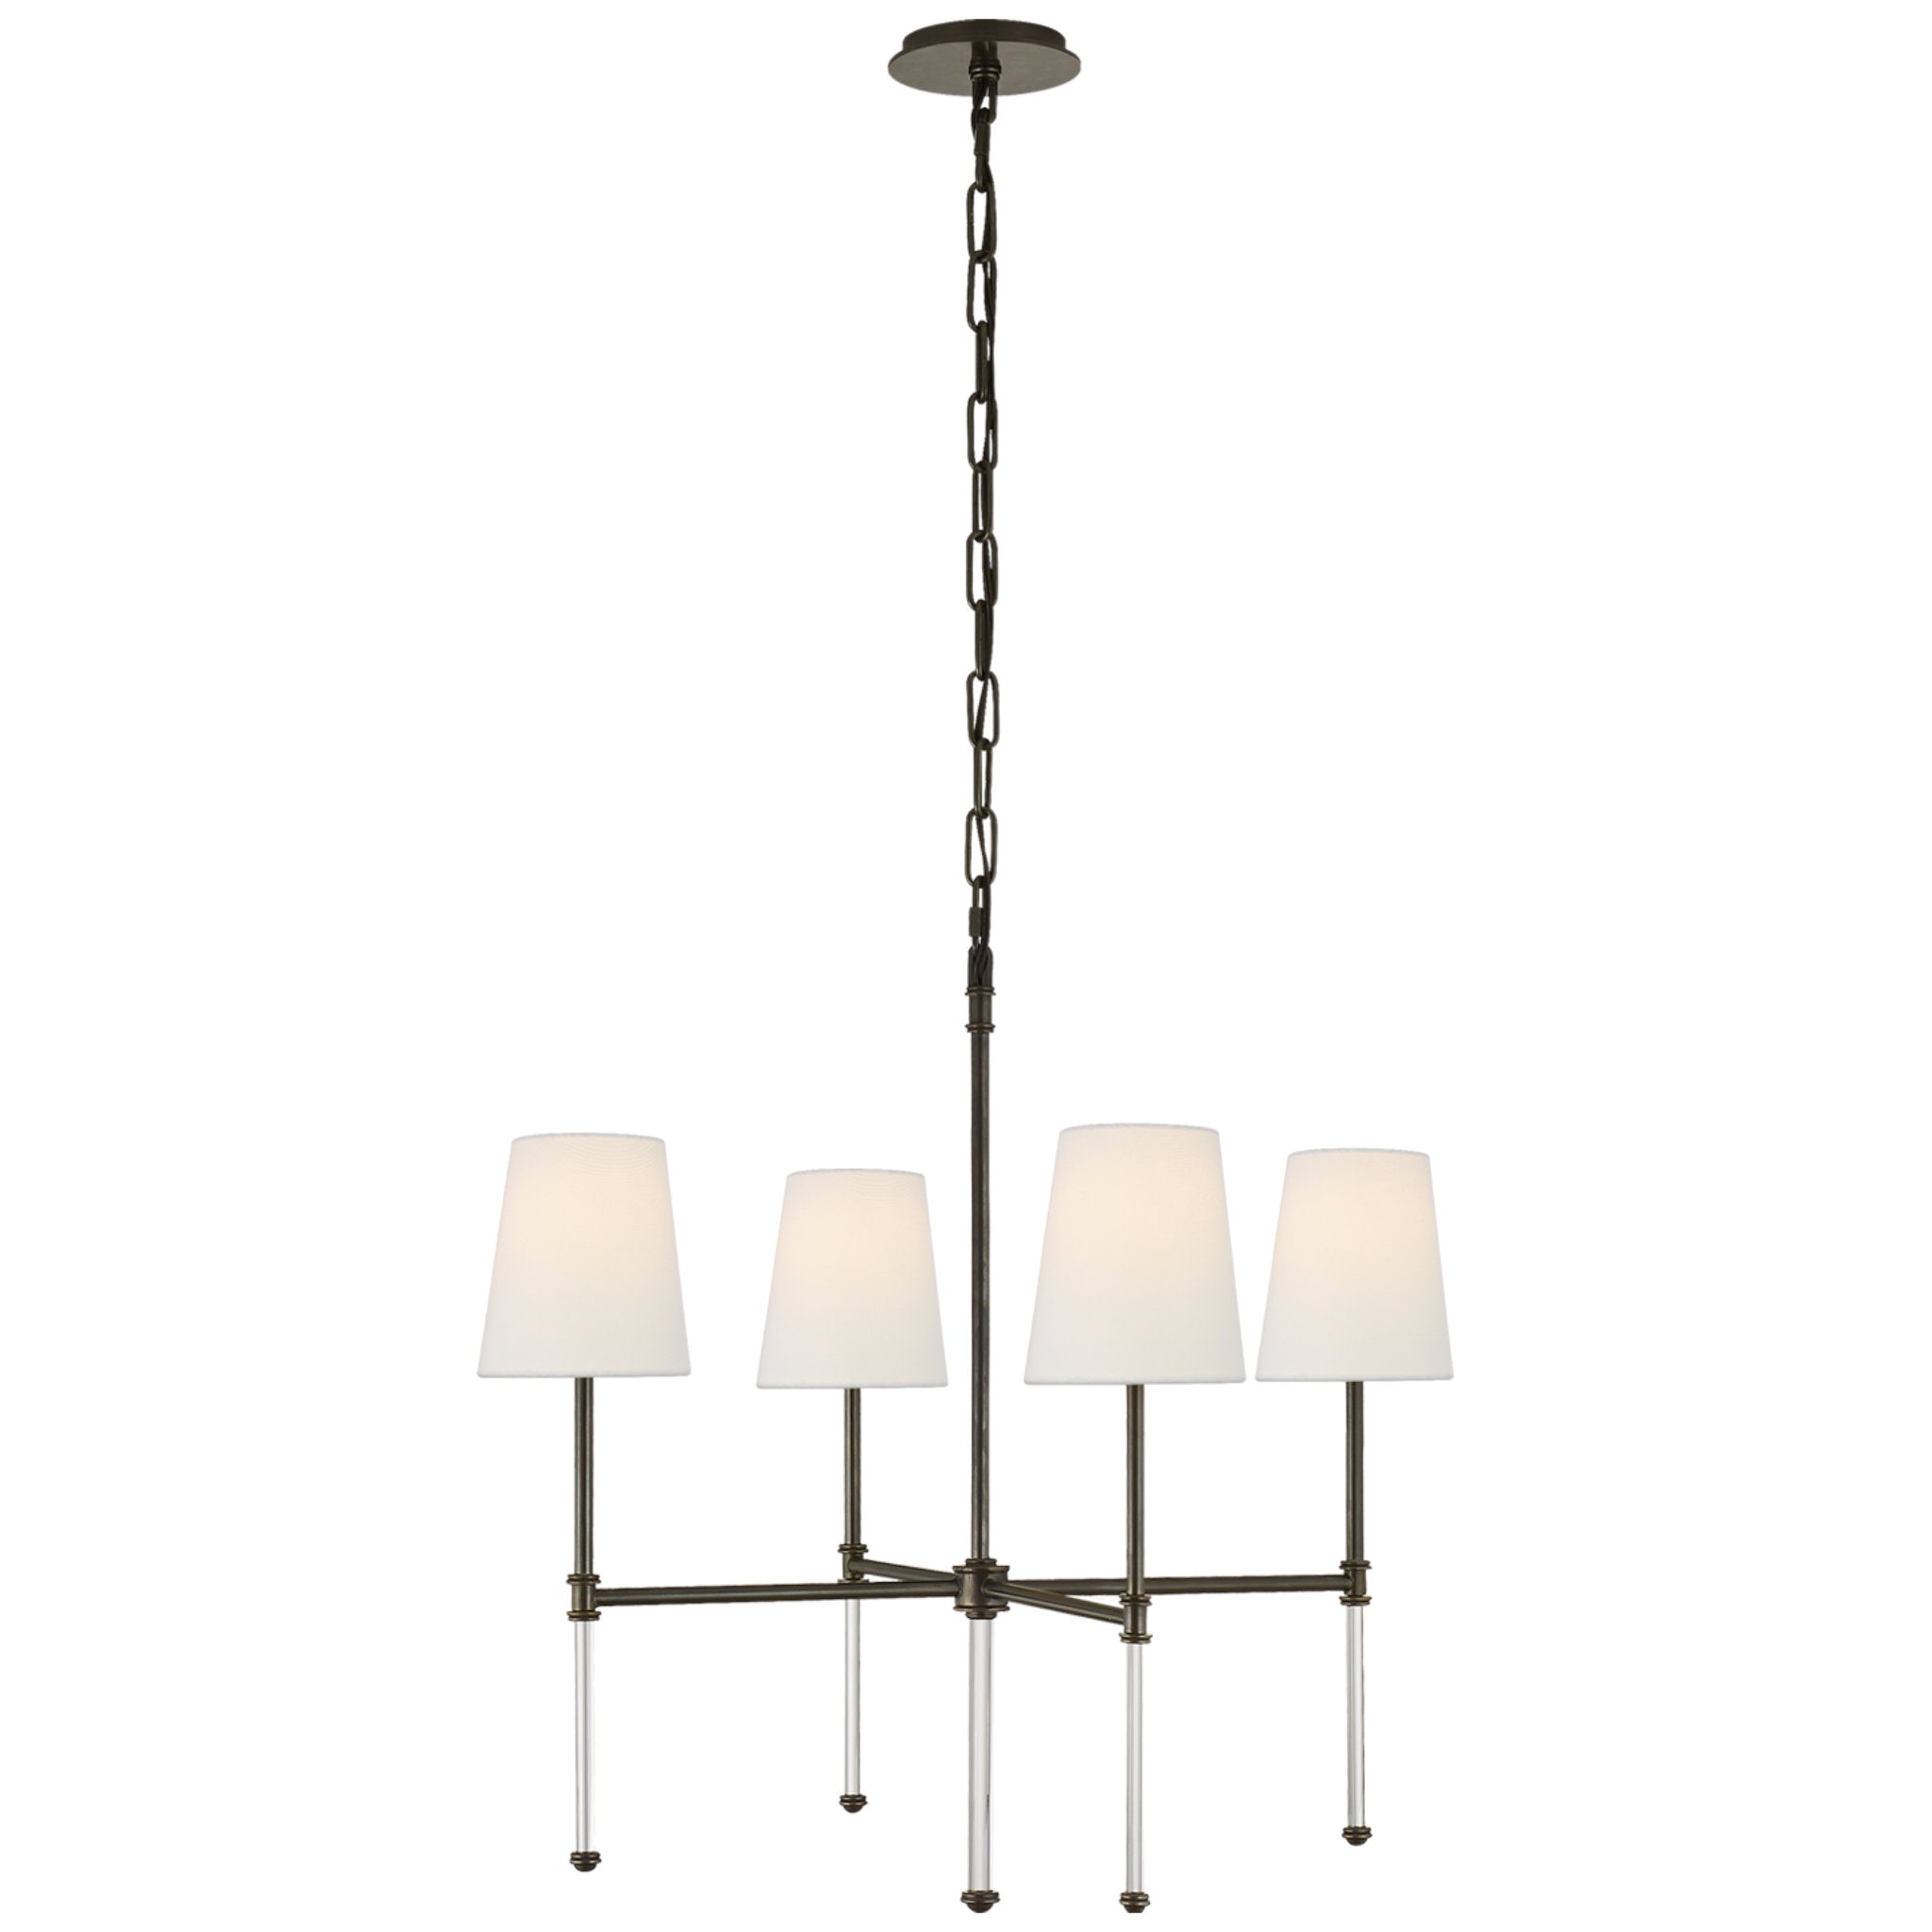 Suzanne Kasler Camille Small Chandelier in Bronze with Linen Shades